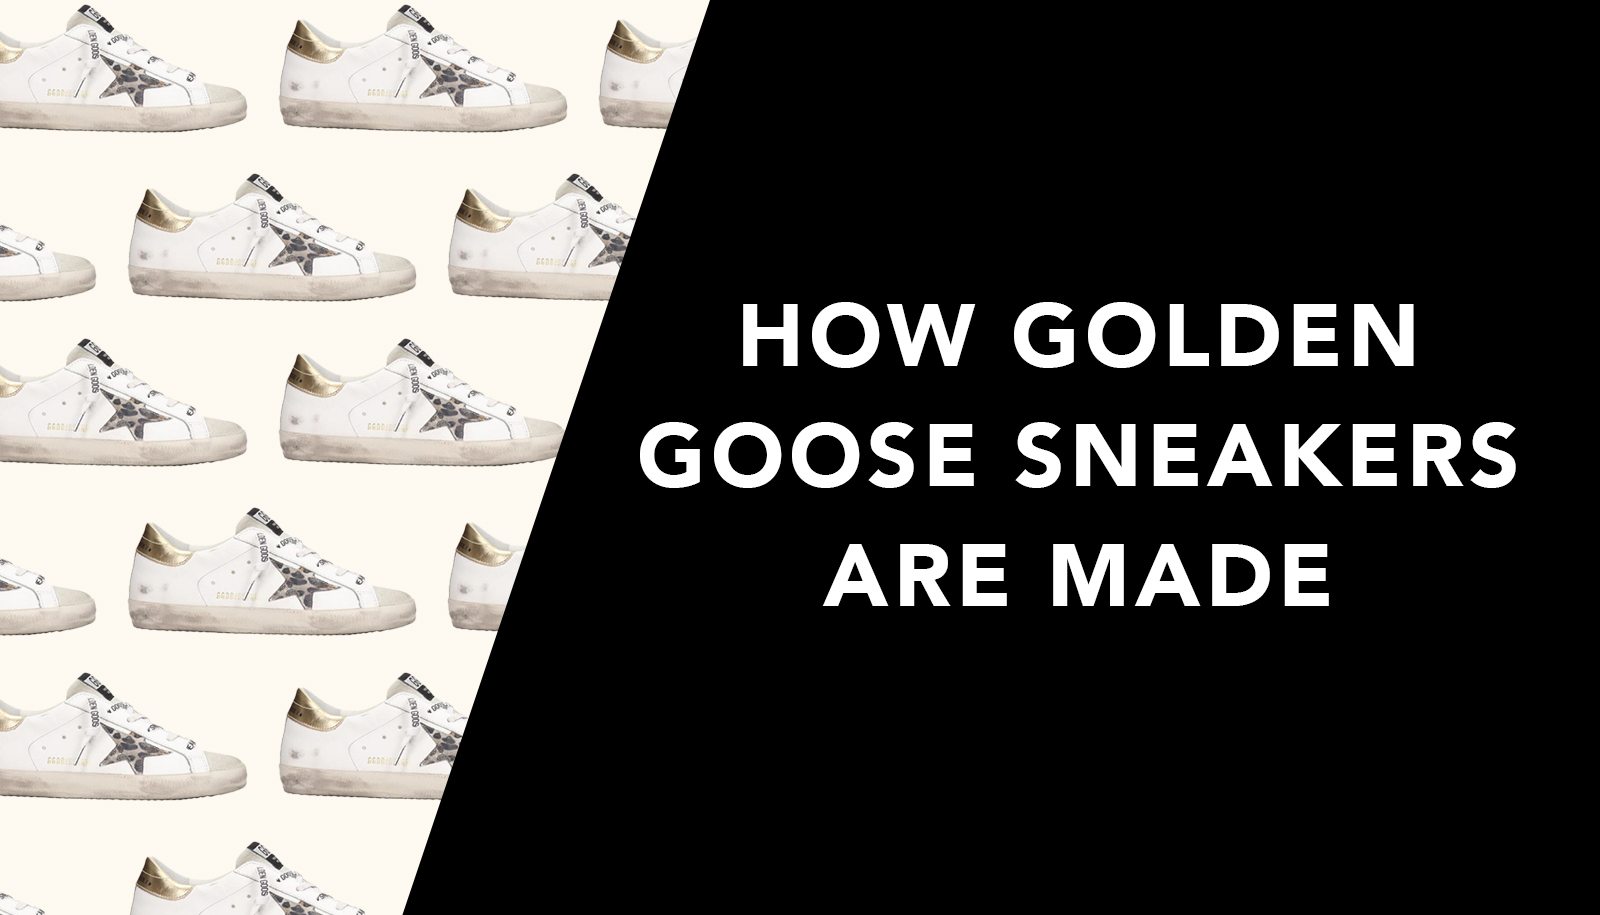 How Golden Goose Sneakers are Made